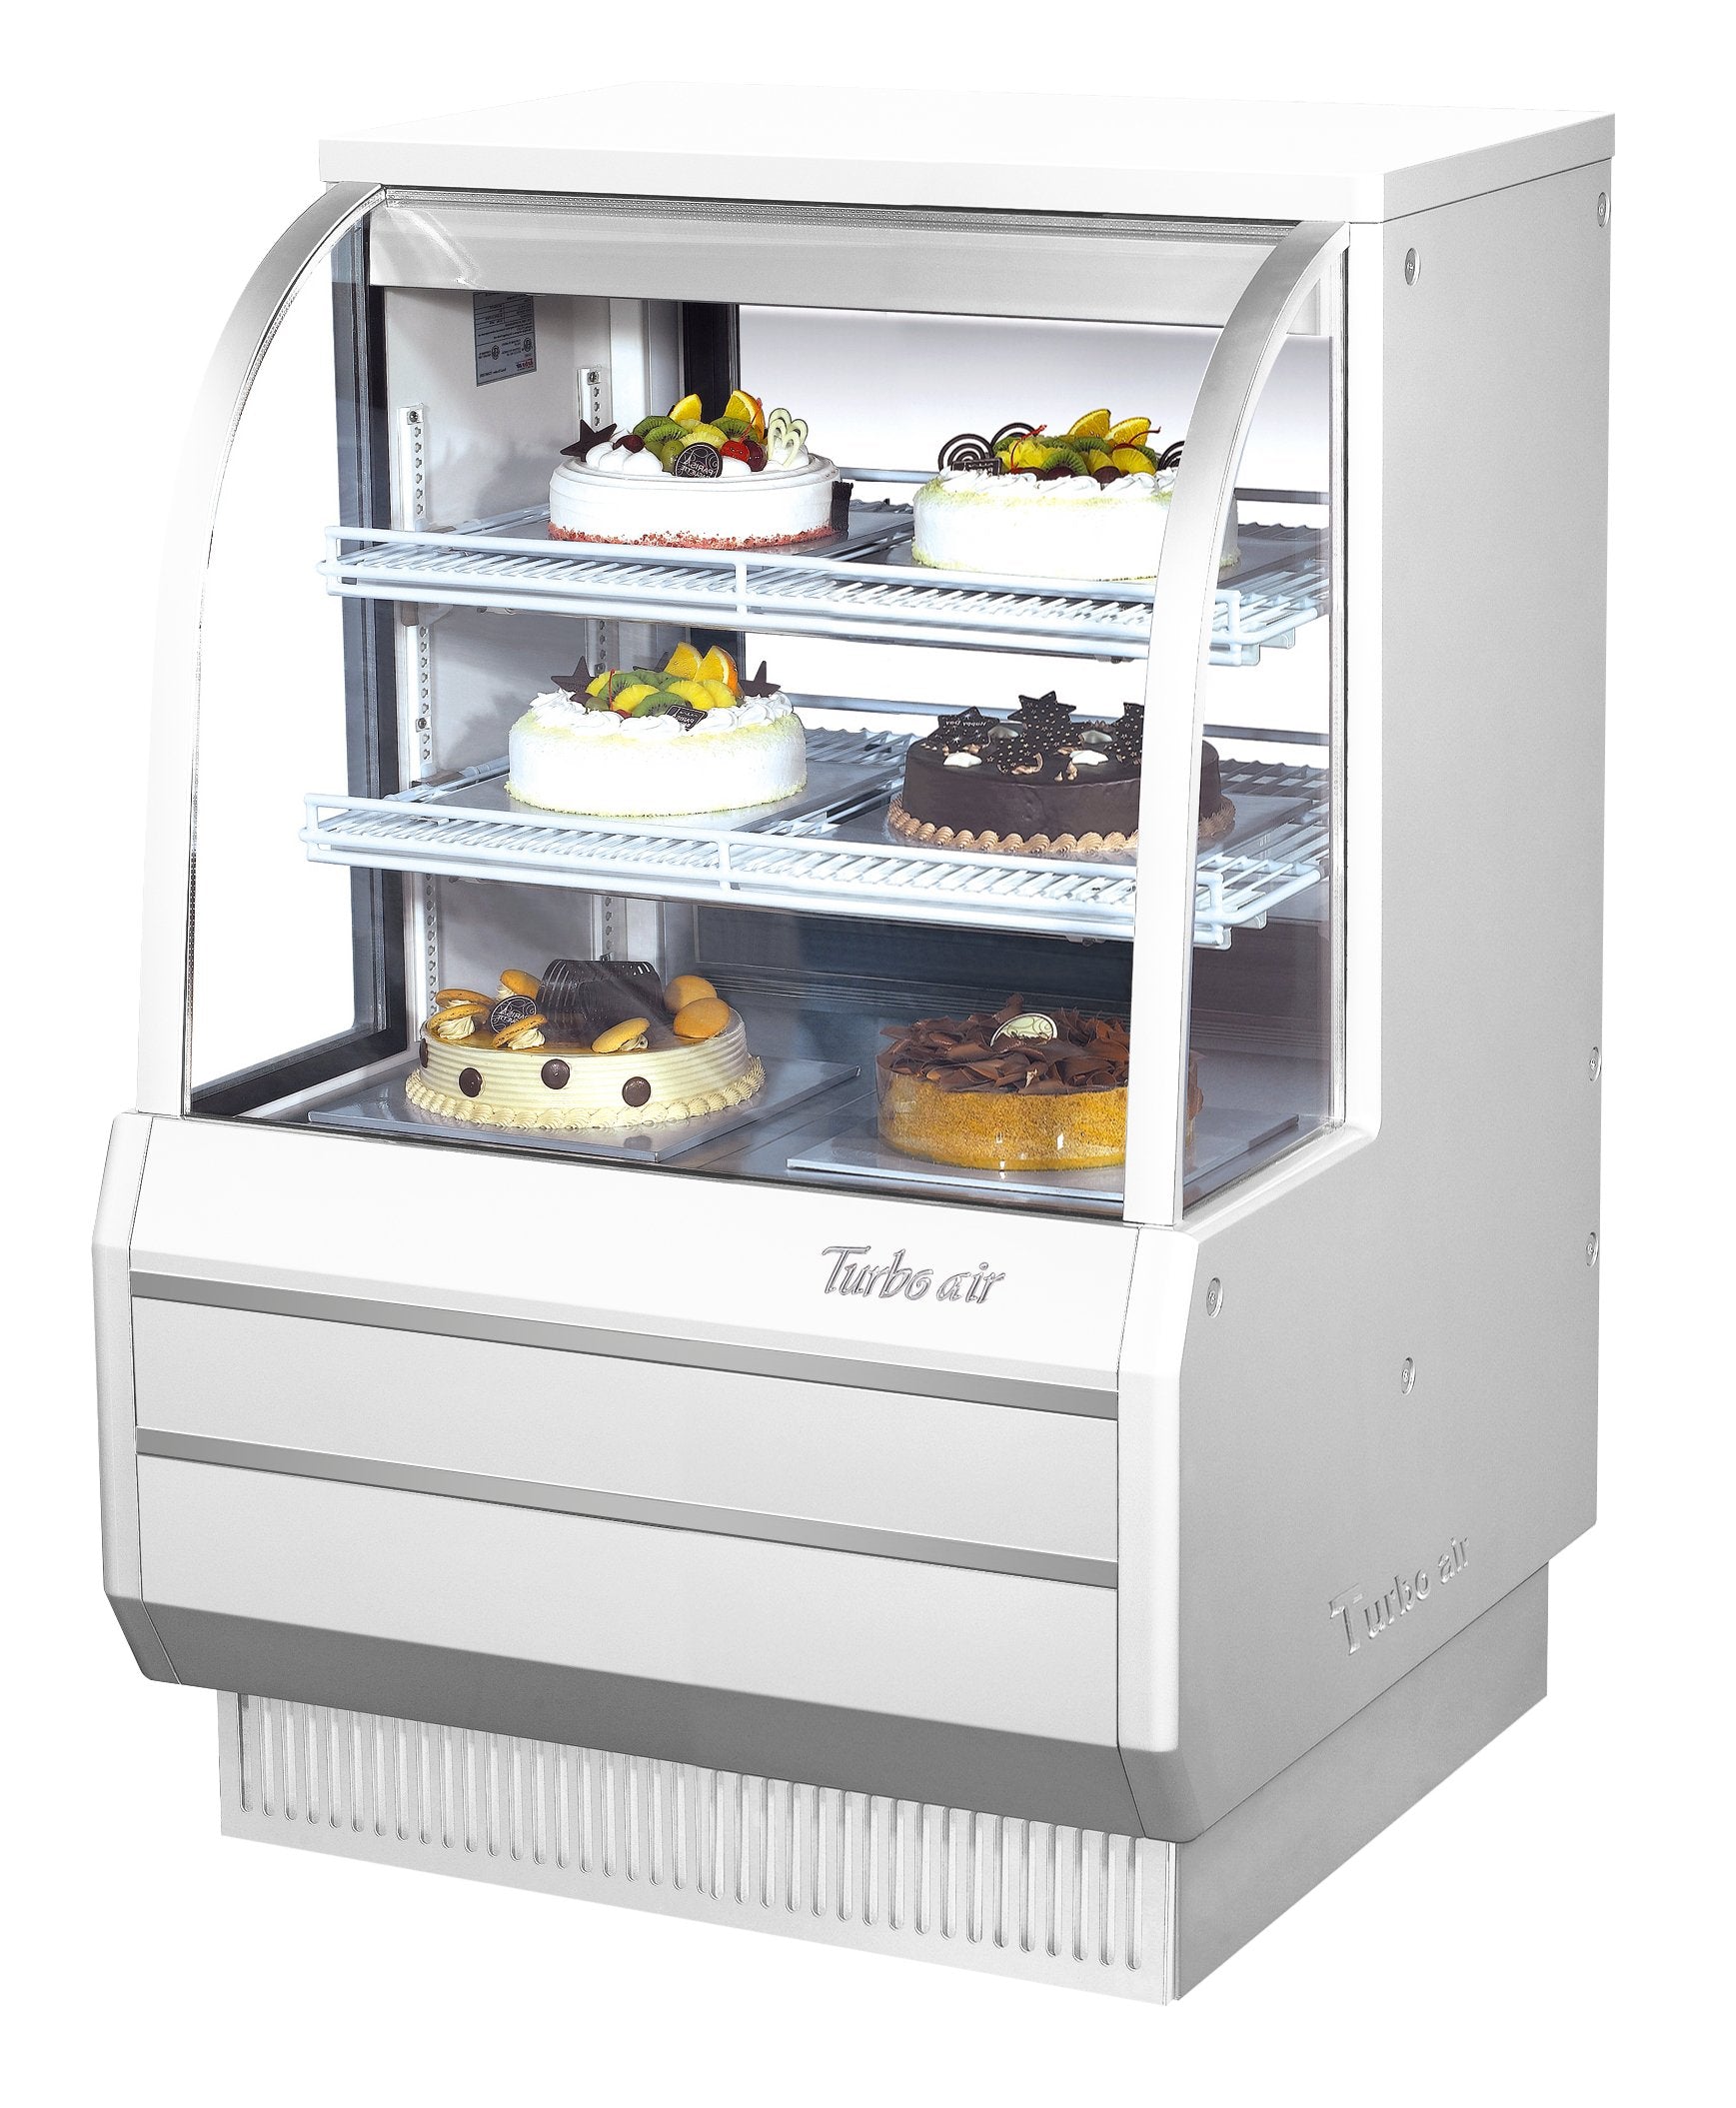 Turbo Air TCGB-36-W-N 3' Bakery Case-Refrigerated - White